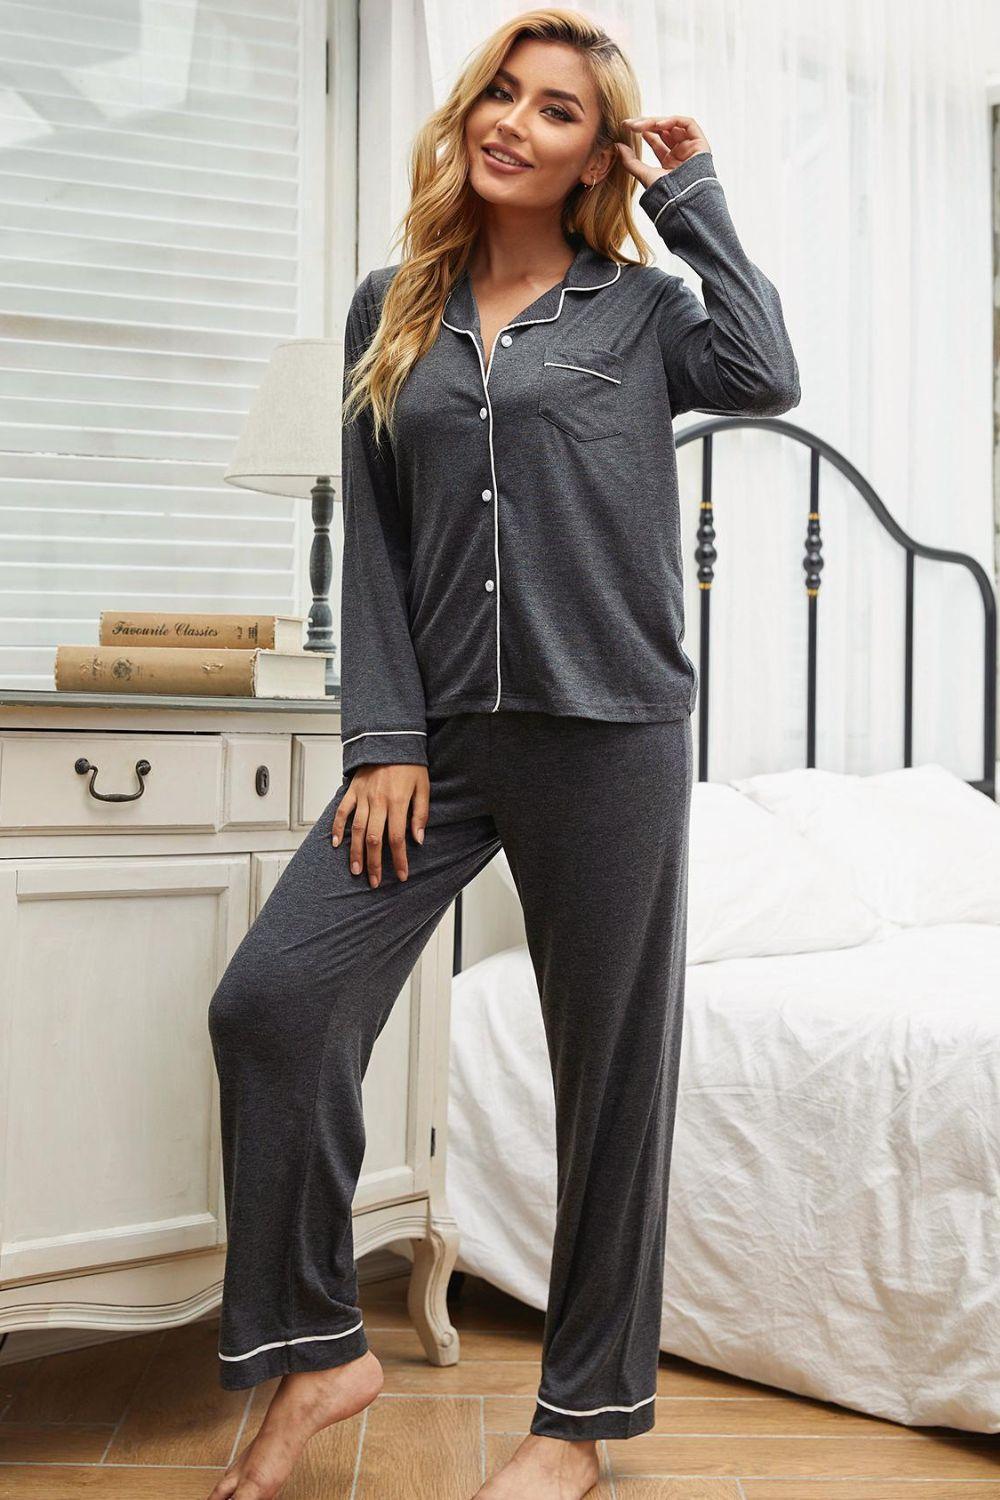 Relaxation Ready Contrast Piping Loungewear Set - MXSTUDIO.COM